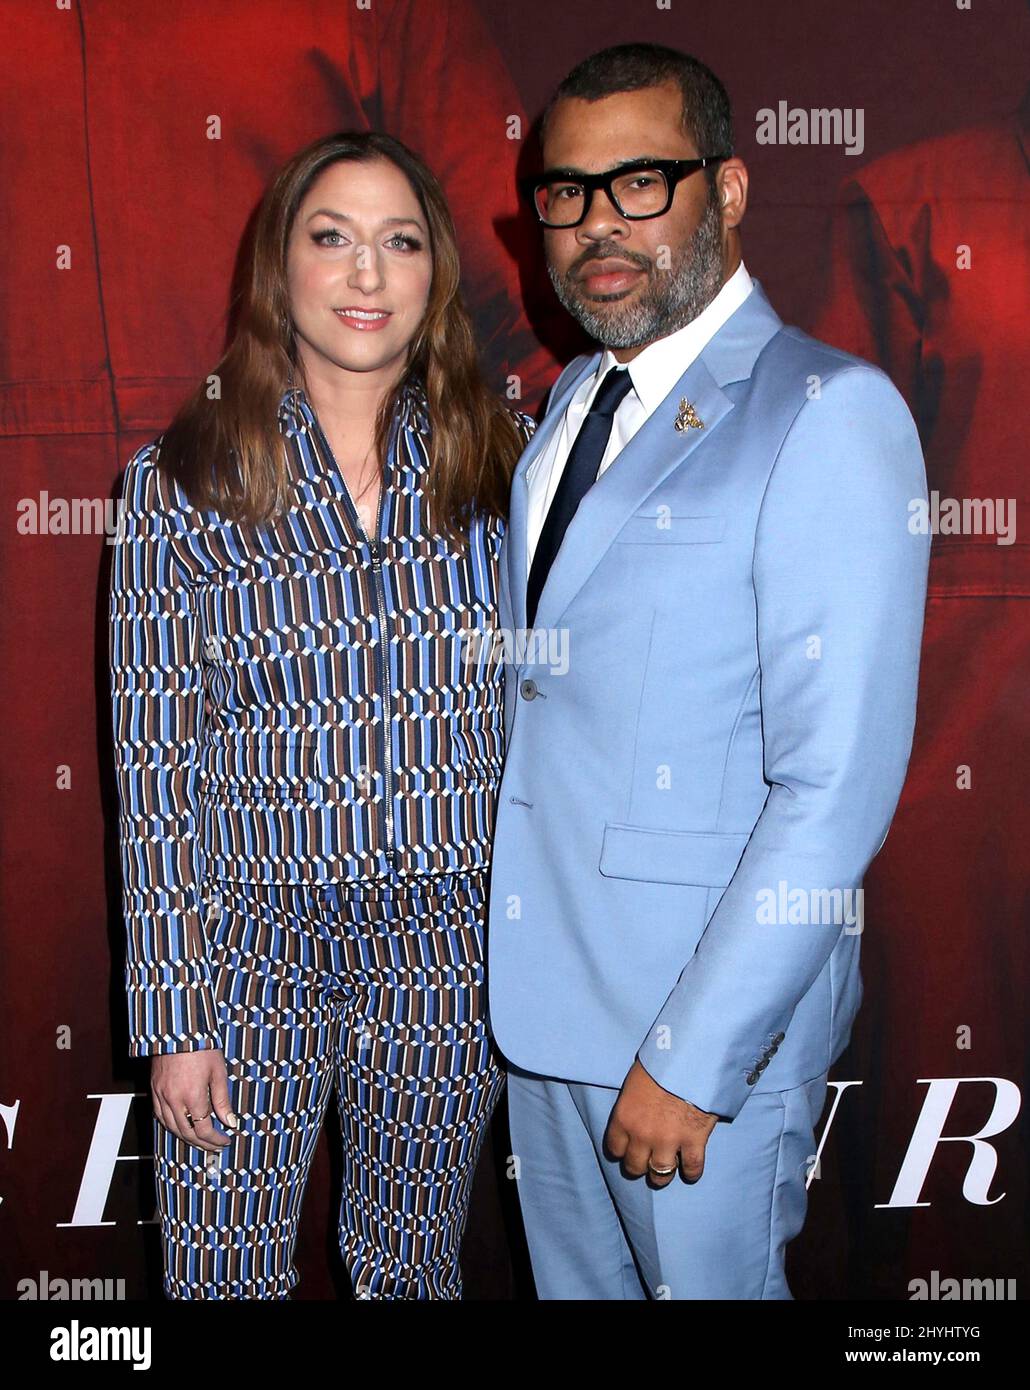 Jordan Peele & wife Chelsea Peretti attending the 'Us' New York Premiere  held at The Museum of Modern Art on March 19, 2019 in New York City, NY  Stock Photo - Alamy